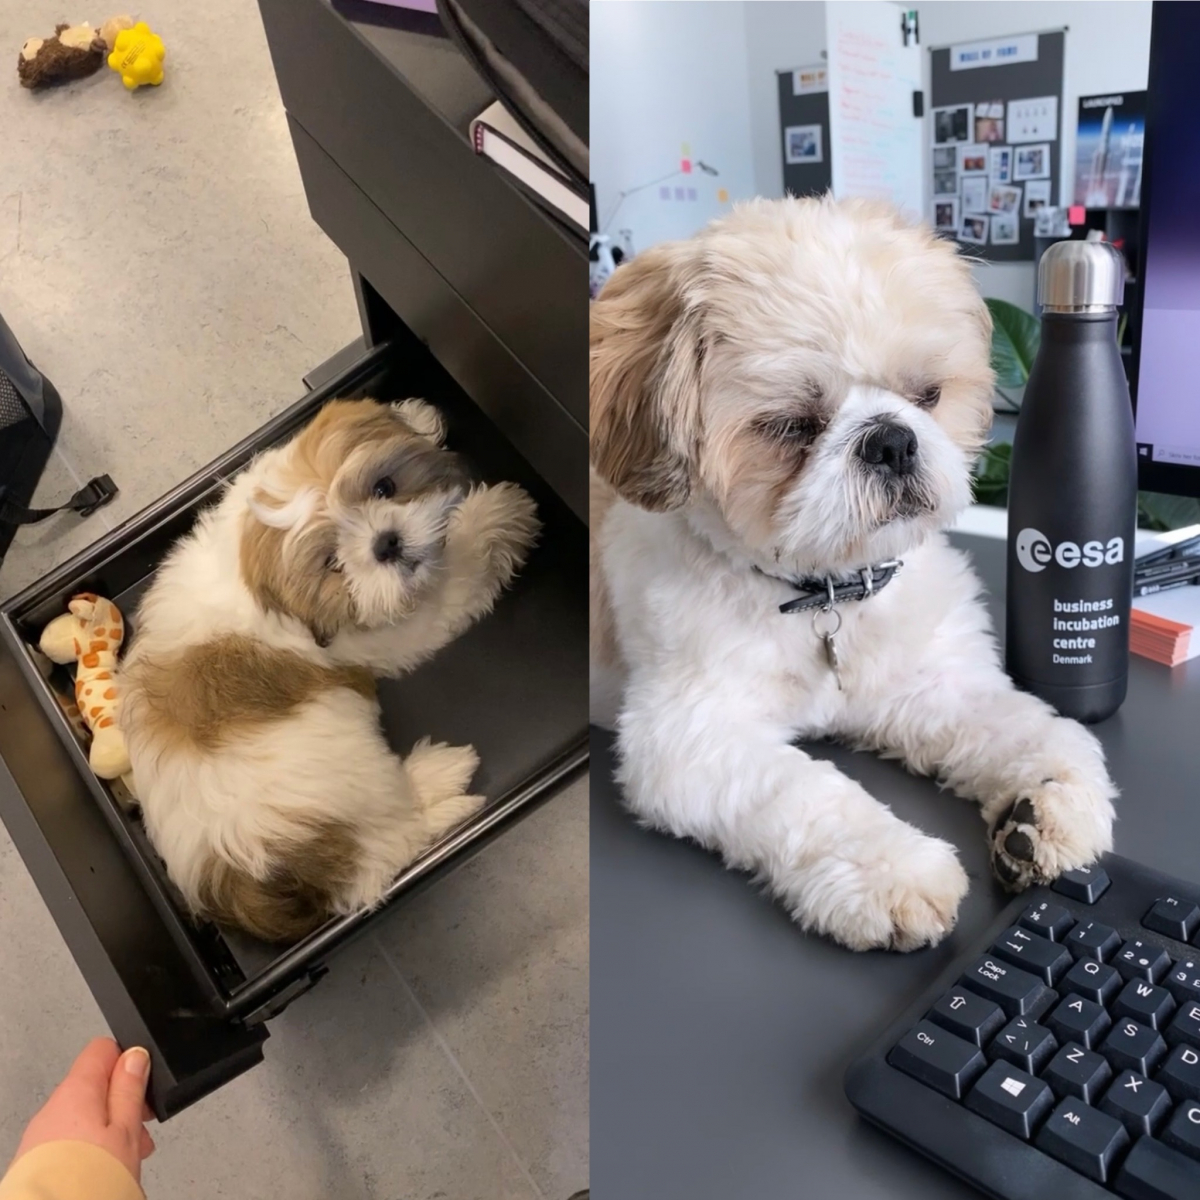 Carlo in action at the office from 12 weeks old to 12 months